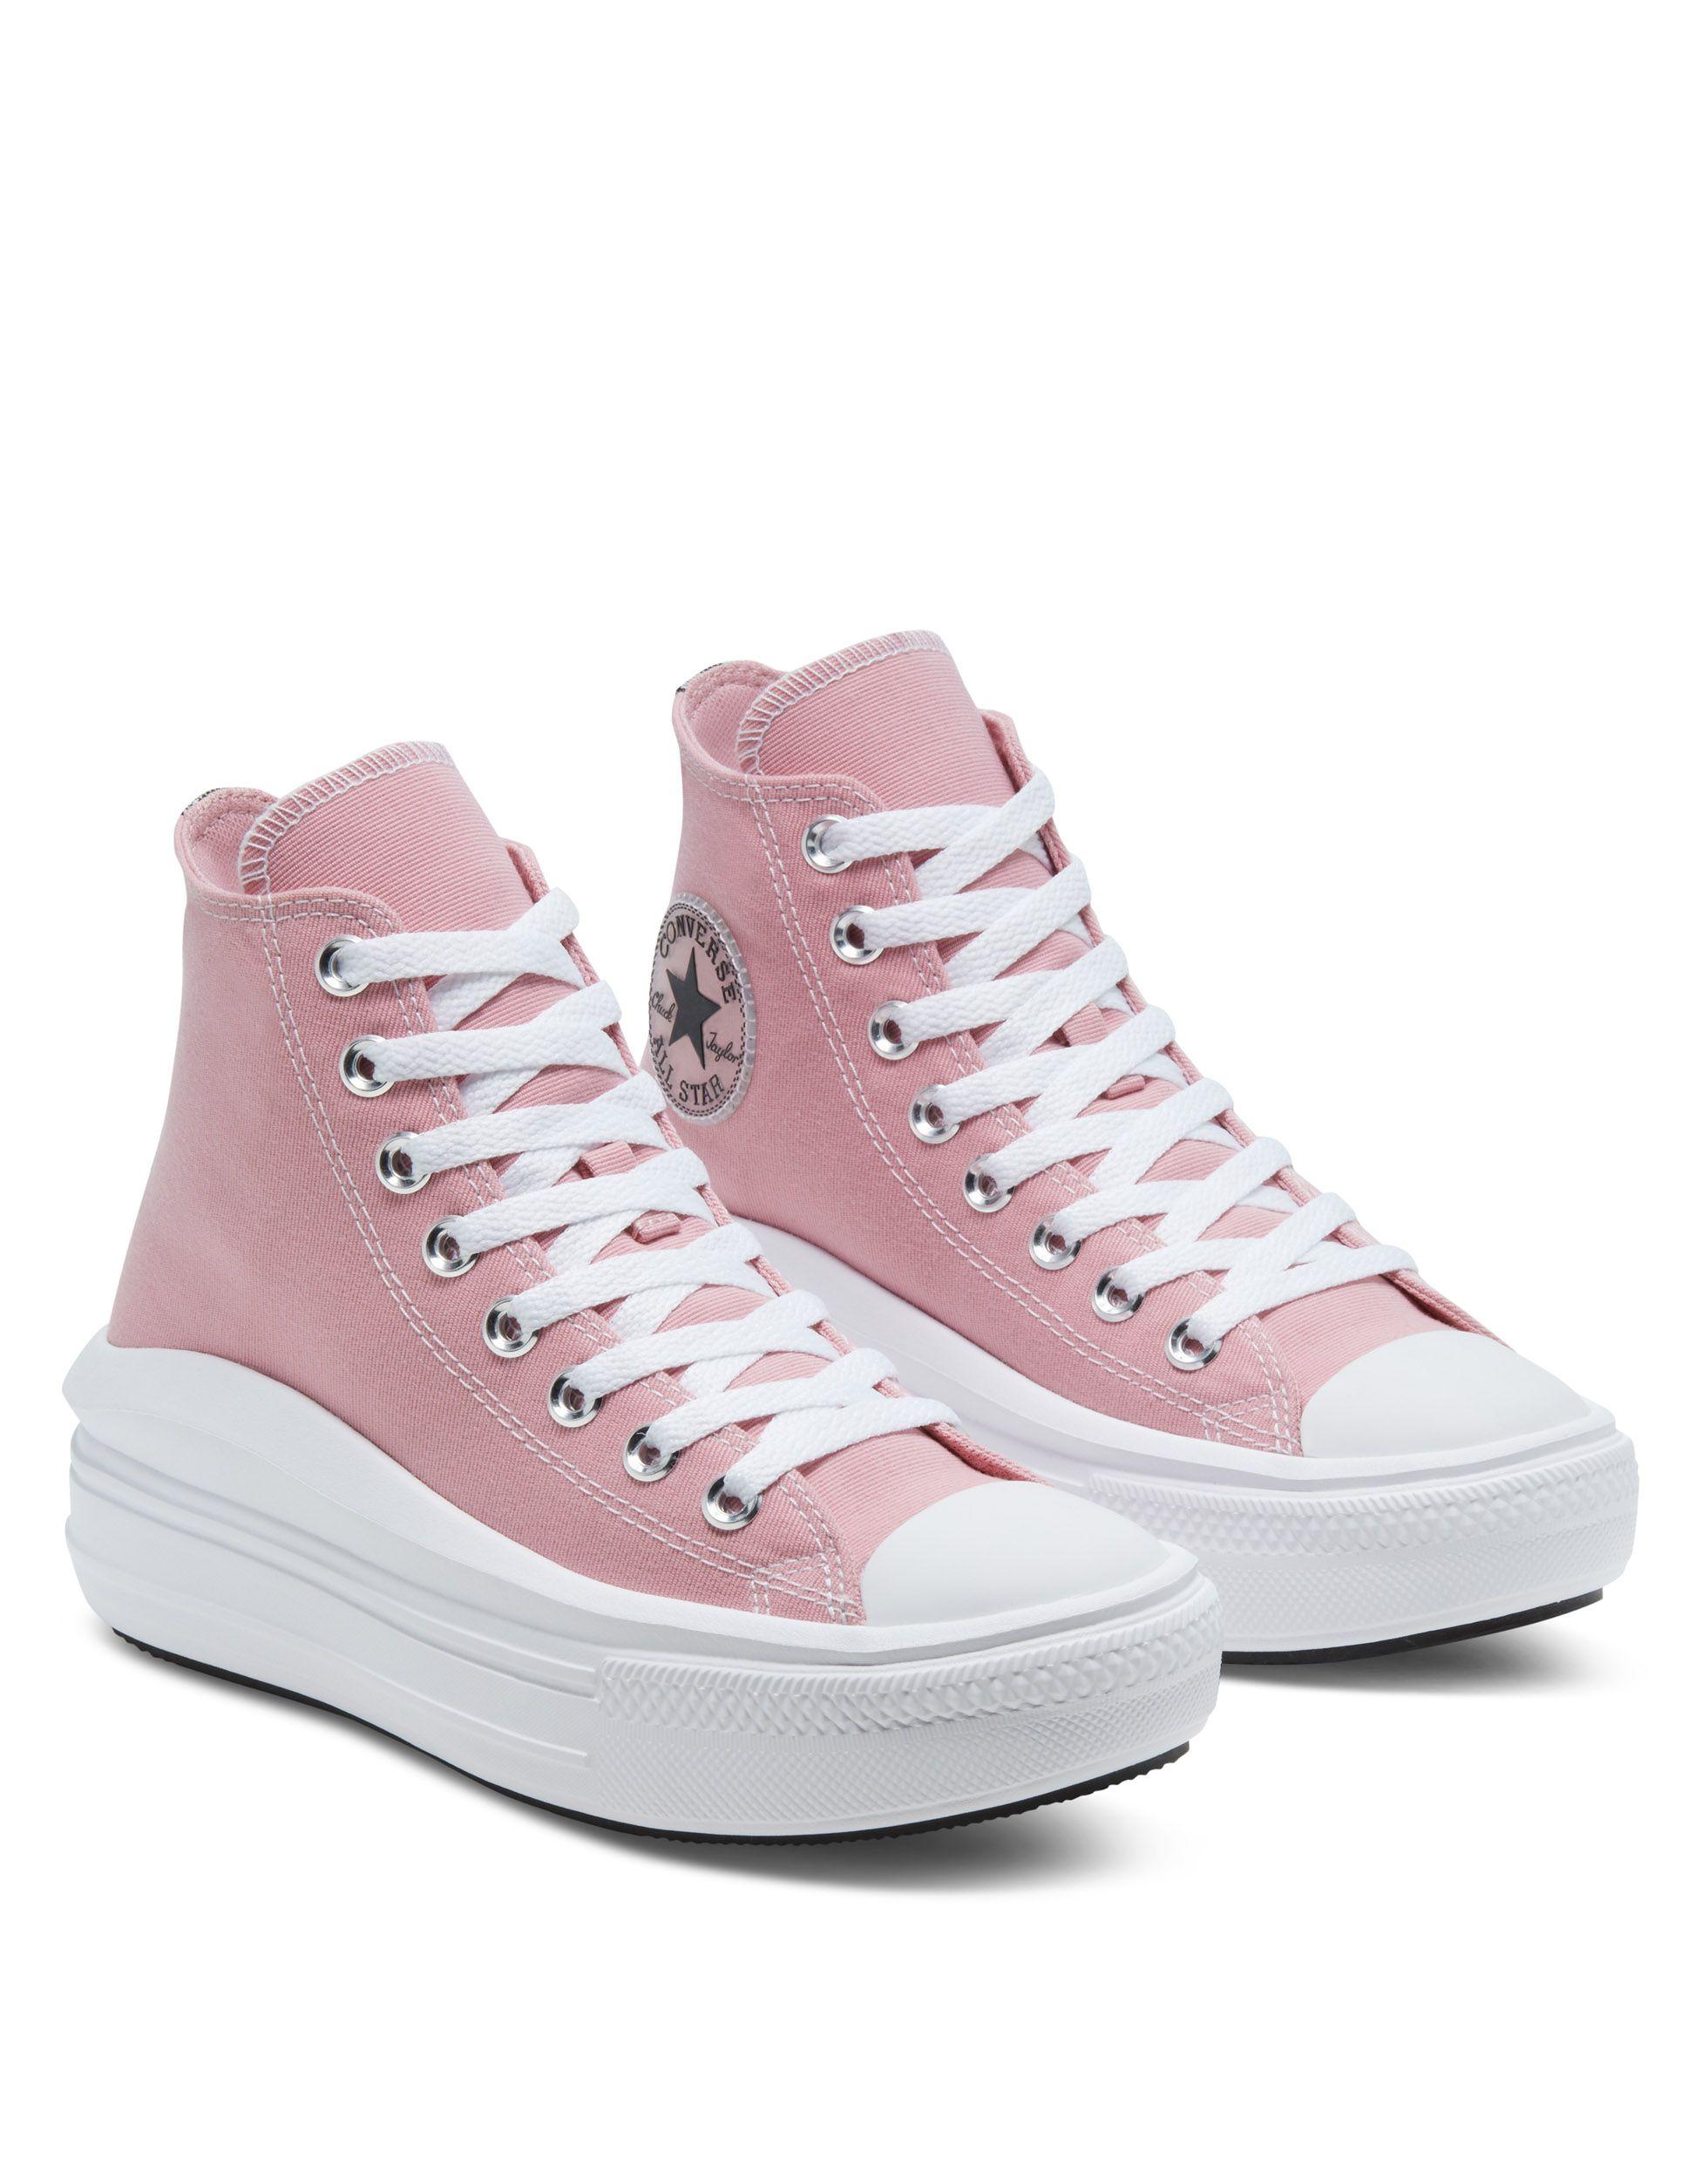 Converse Rubber Move Platform High-top Sneakers in Pink | Lyst Canada